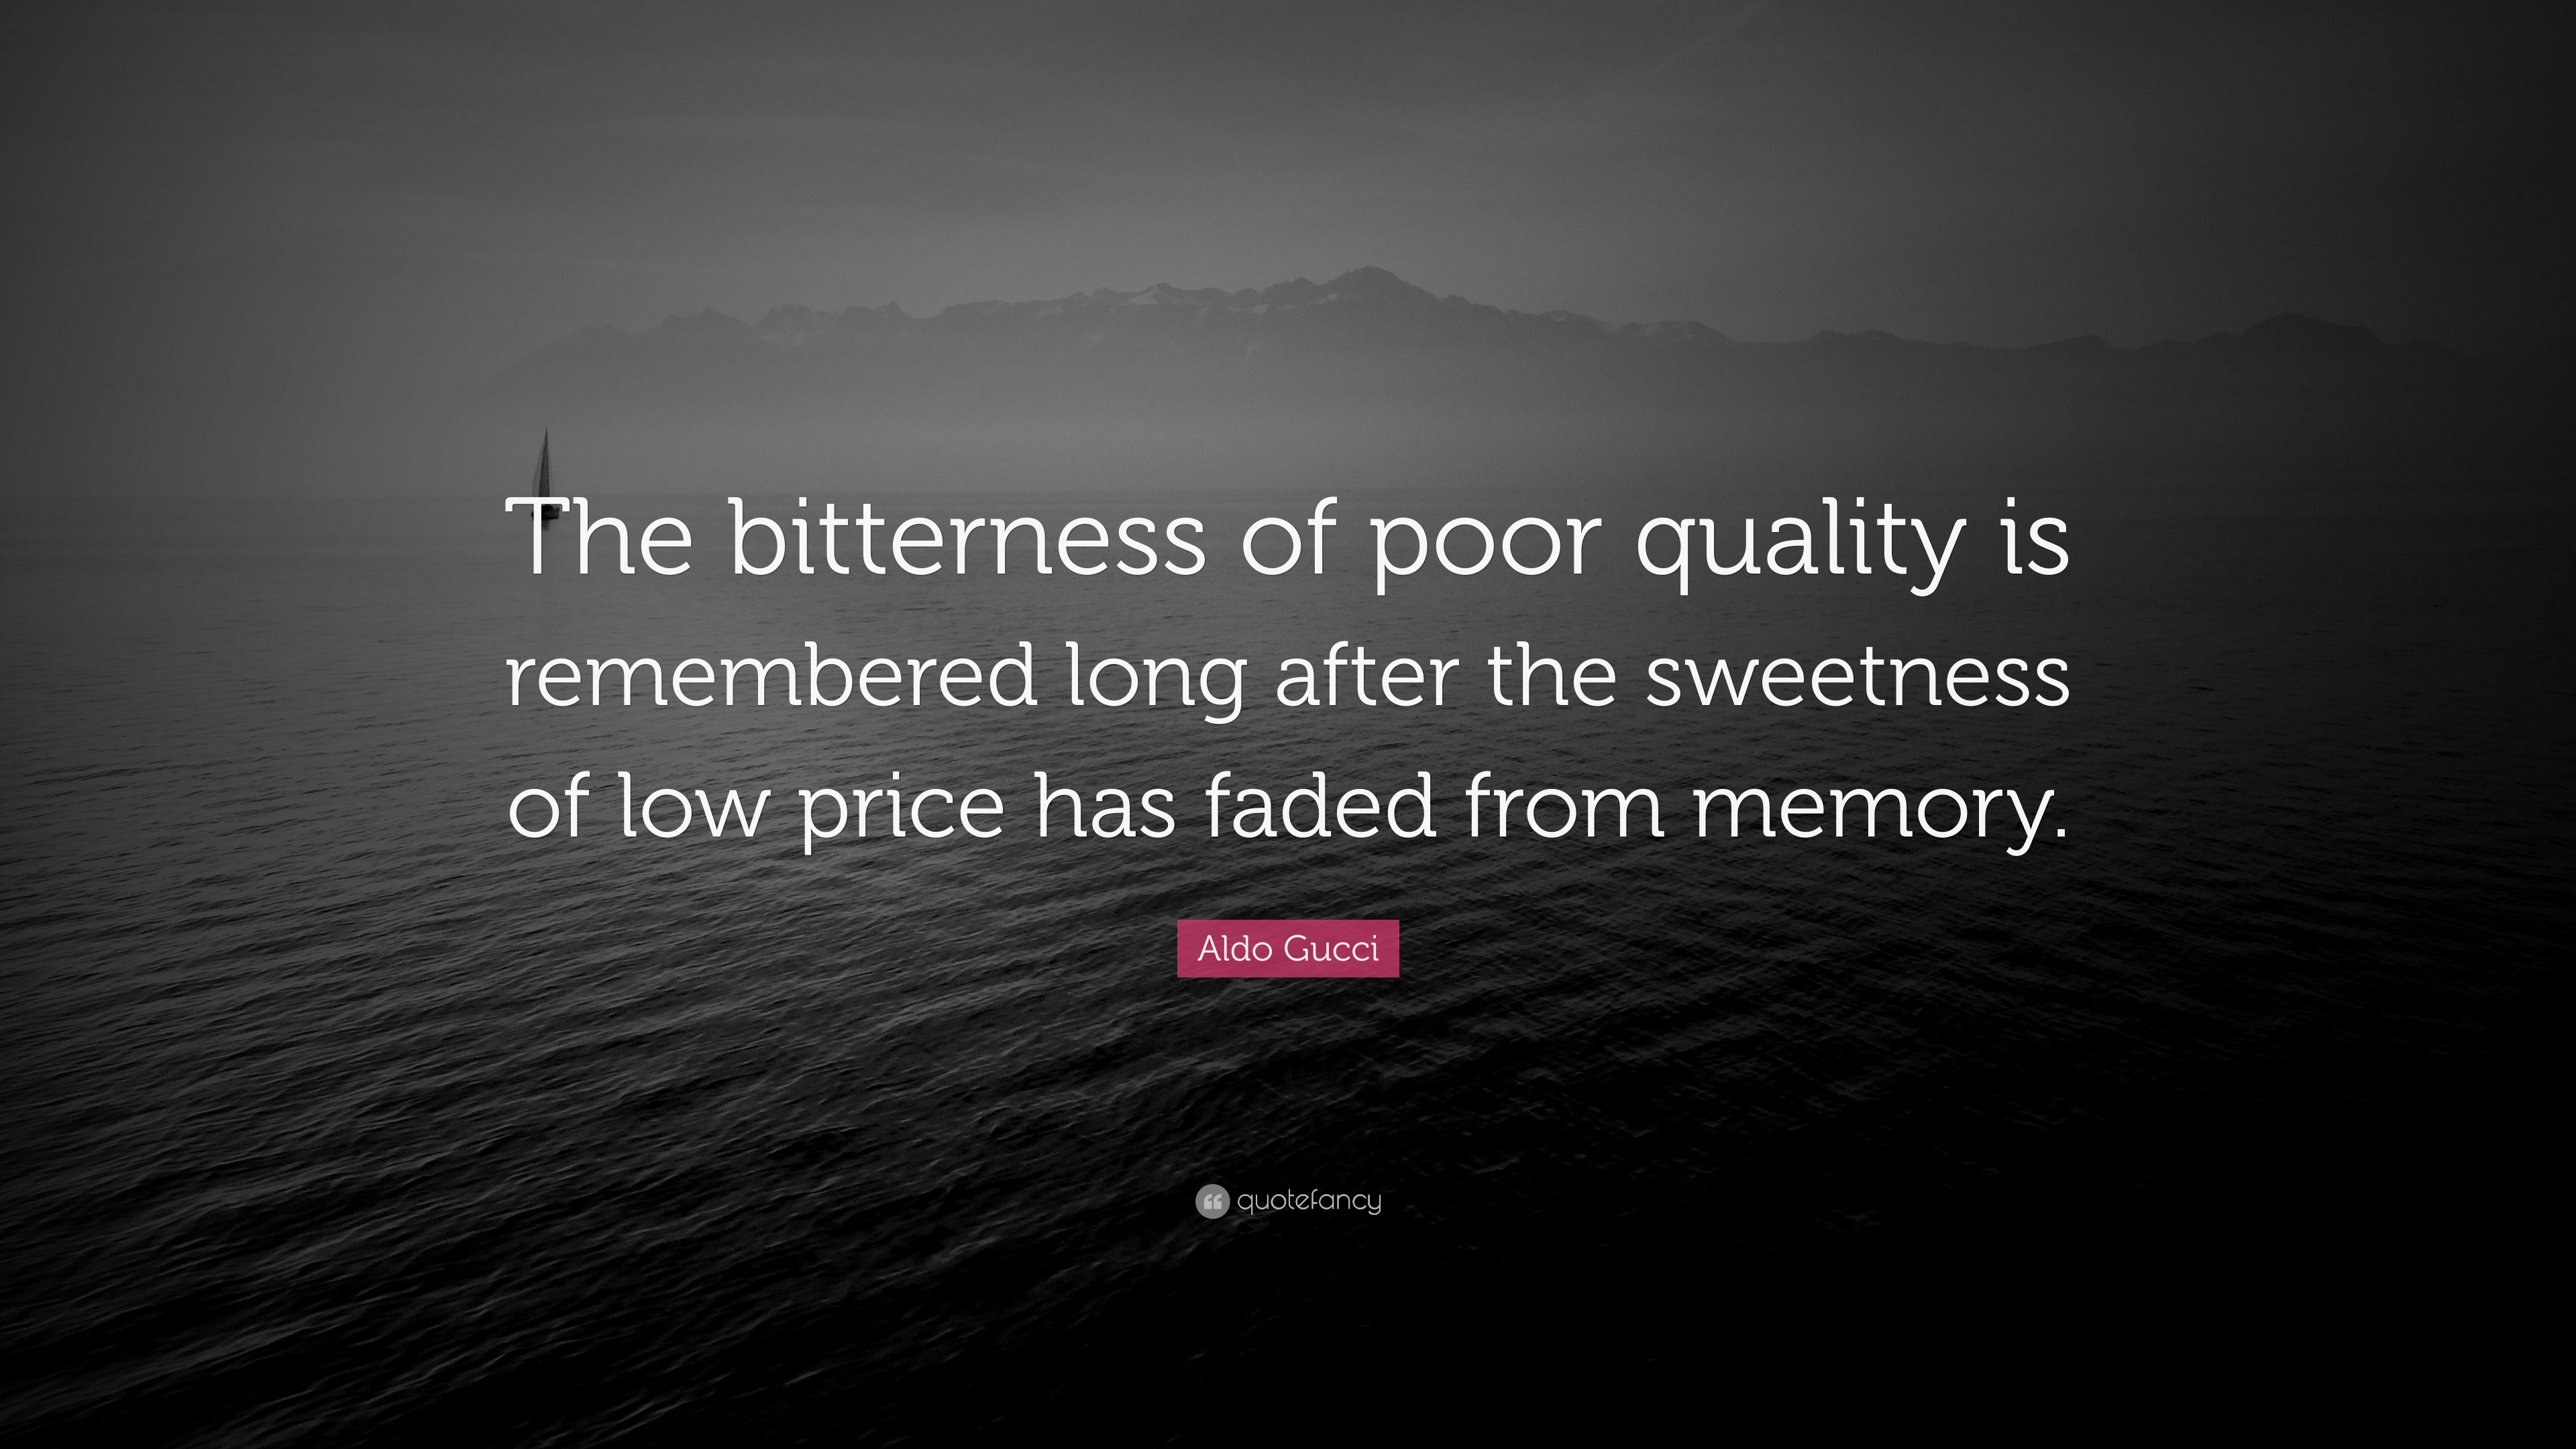 Aldo Gucci Quote: “The bitterness of poor quality is remembered long after  the sweetness of low